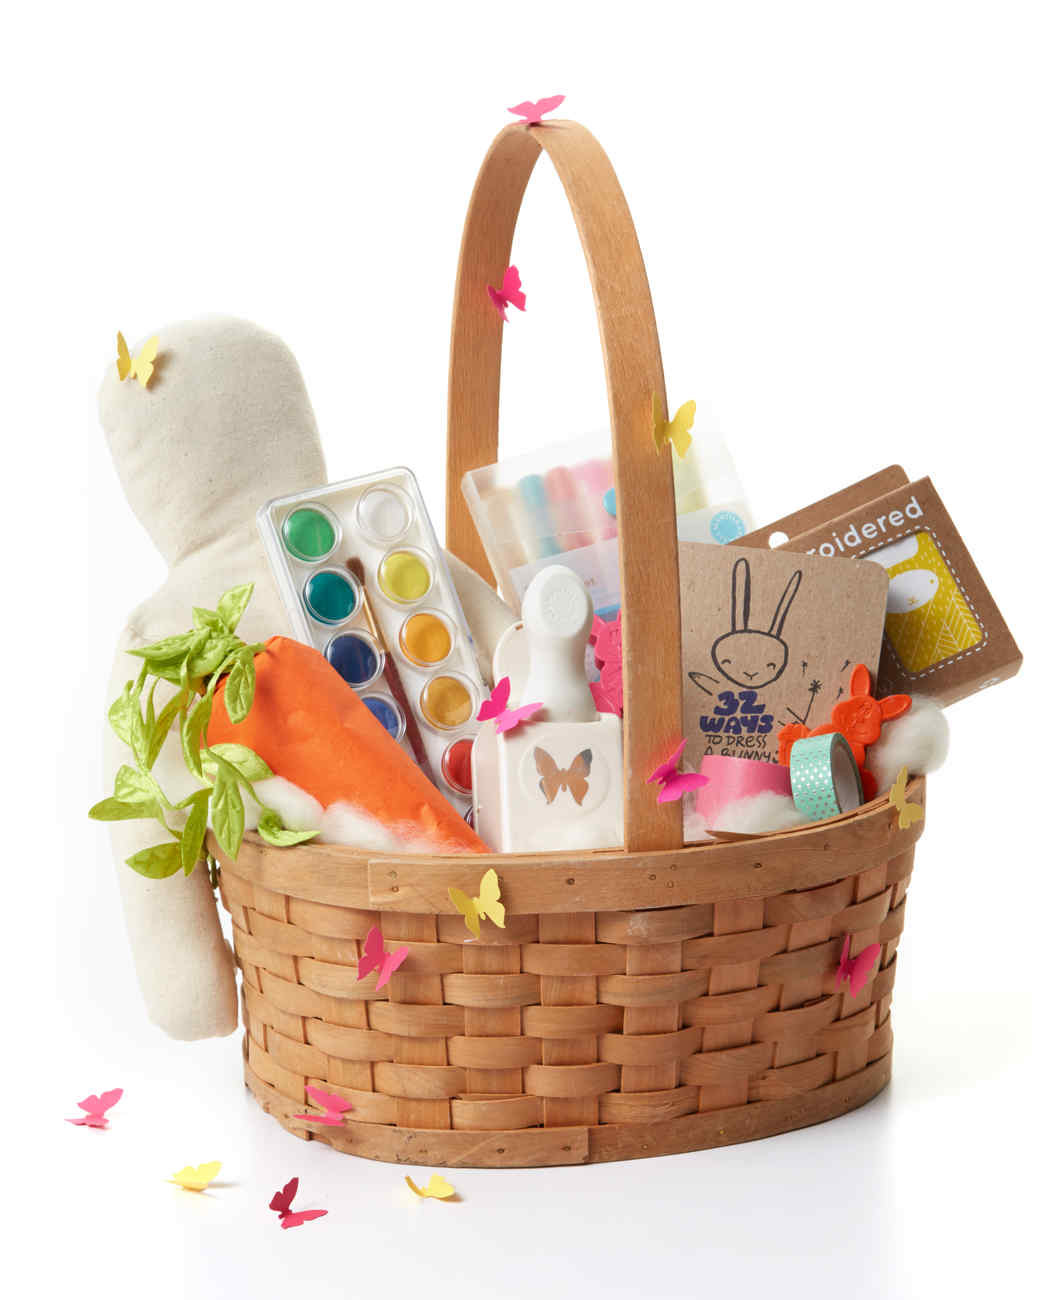 Easter Basket Ideas For Girlfriend
 21 of Our Best Easter Basket Ideas